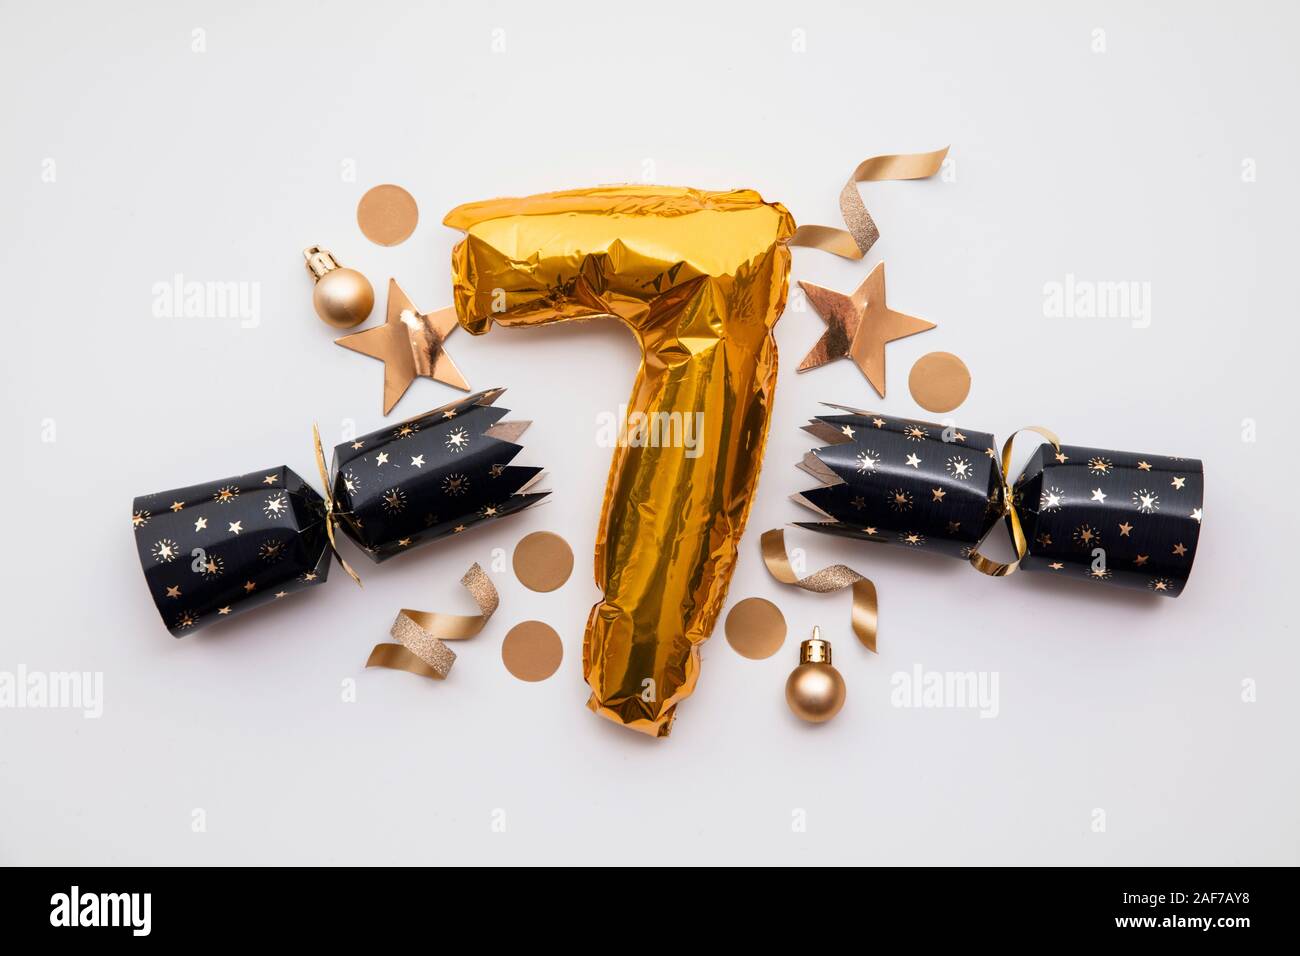 Christmas countdown. Gold number 7 with festive cristmas cracker decorations Stock Photo